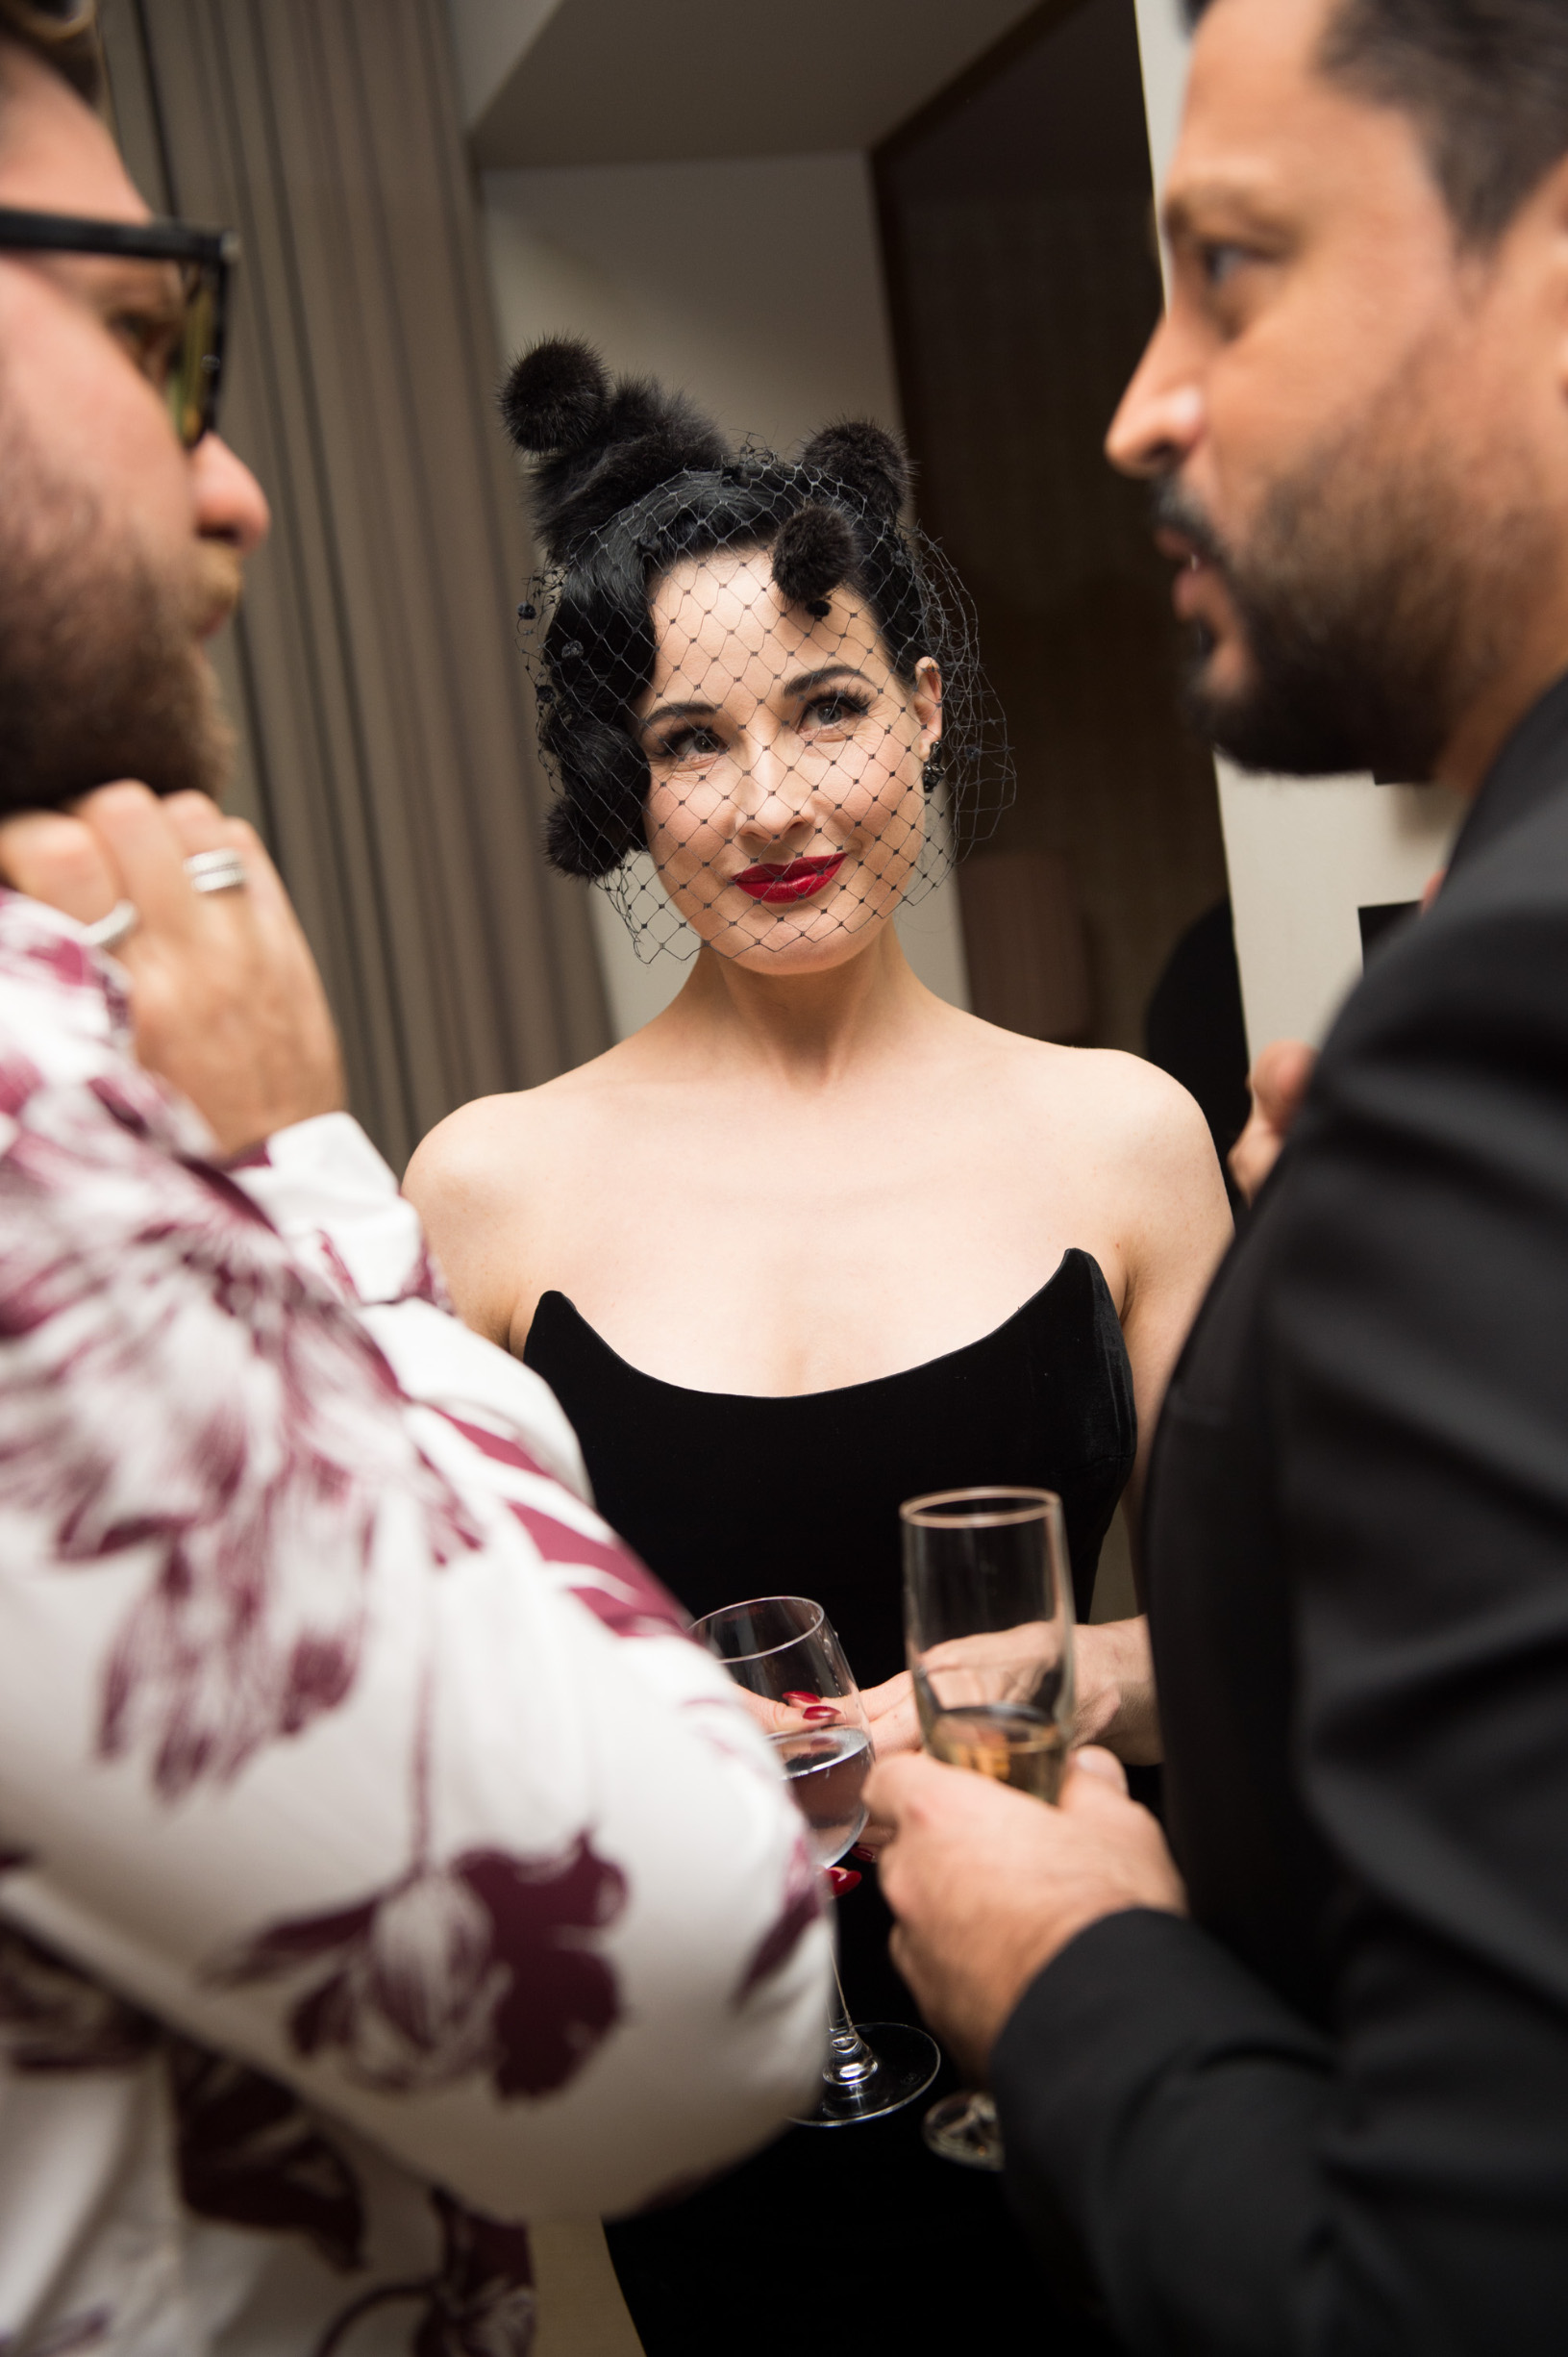 WEST HOLLYWOOD, CA - NOVEMBER 16:  Actress Dita Von Teese and designer Zuhair Murad (R) attend the Zuhair Murad cocktail party at Sunset Tower Hotel on November 16, 2016 in West Hollywood, California.  (Photo by Emma McIntyre/Getty Images for Zuhair Murad)